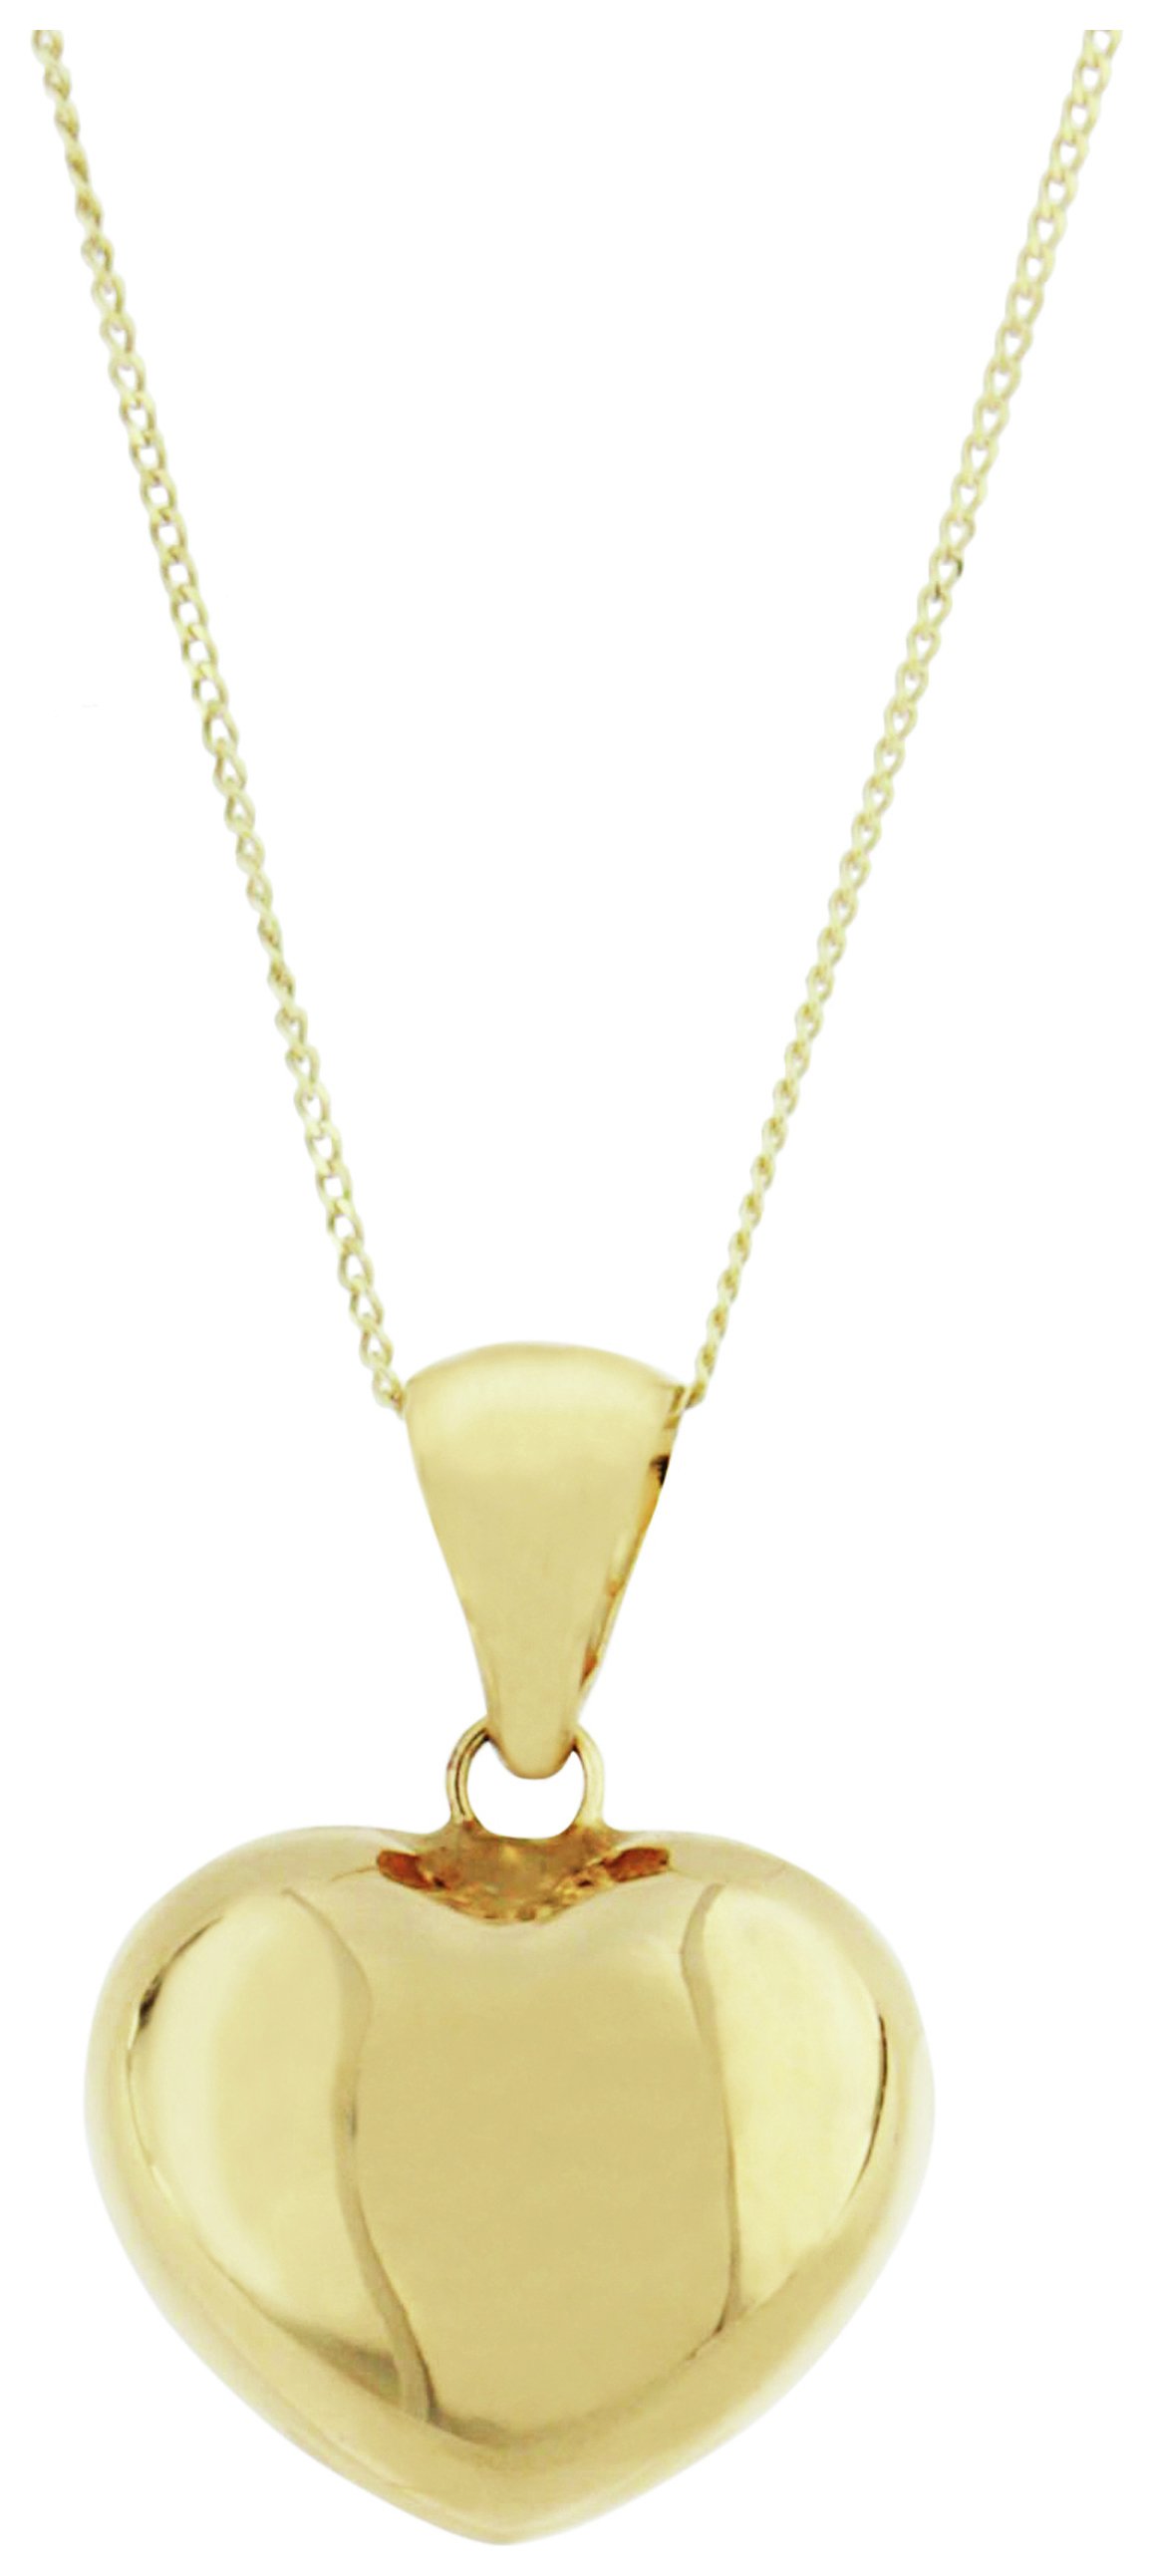 EAN 5055860300086 product image for Bracci 9ct Gold Solid Look Puffed Heart Pendant Necklace | upcitemdb.com